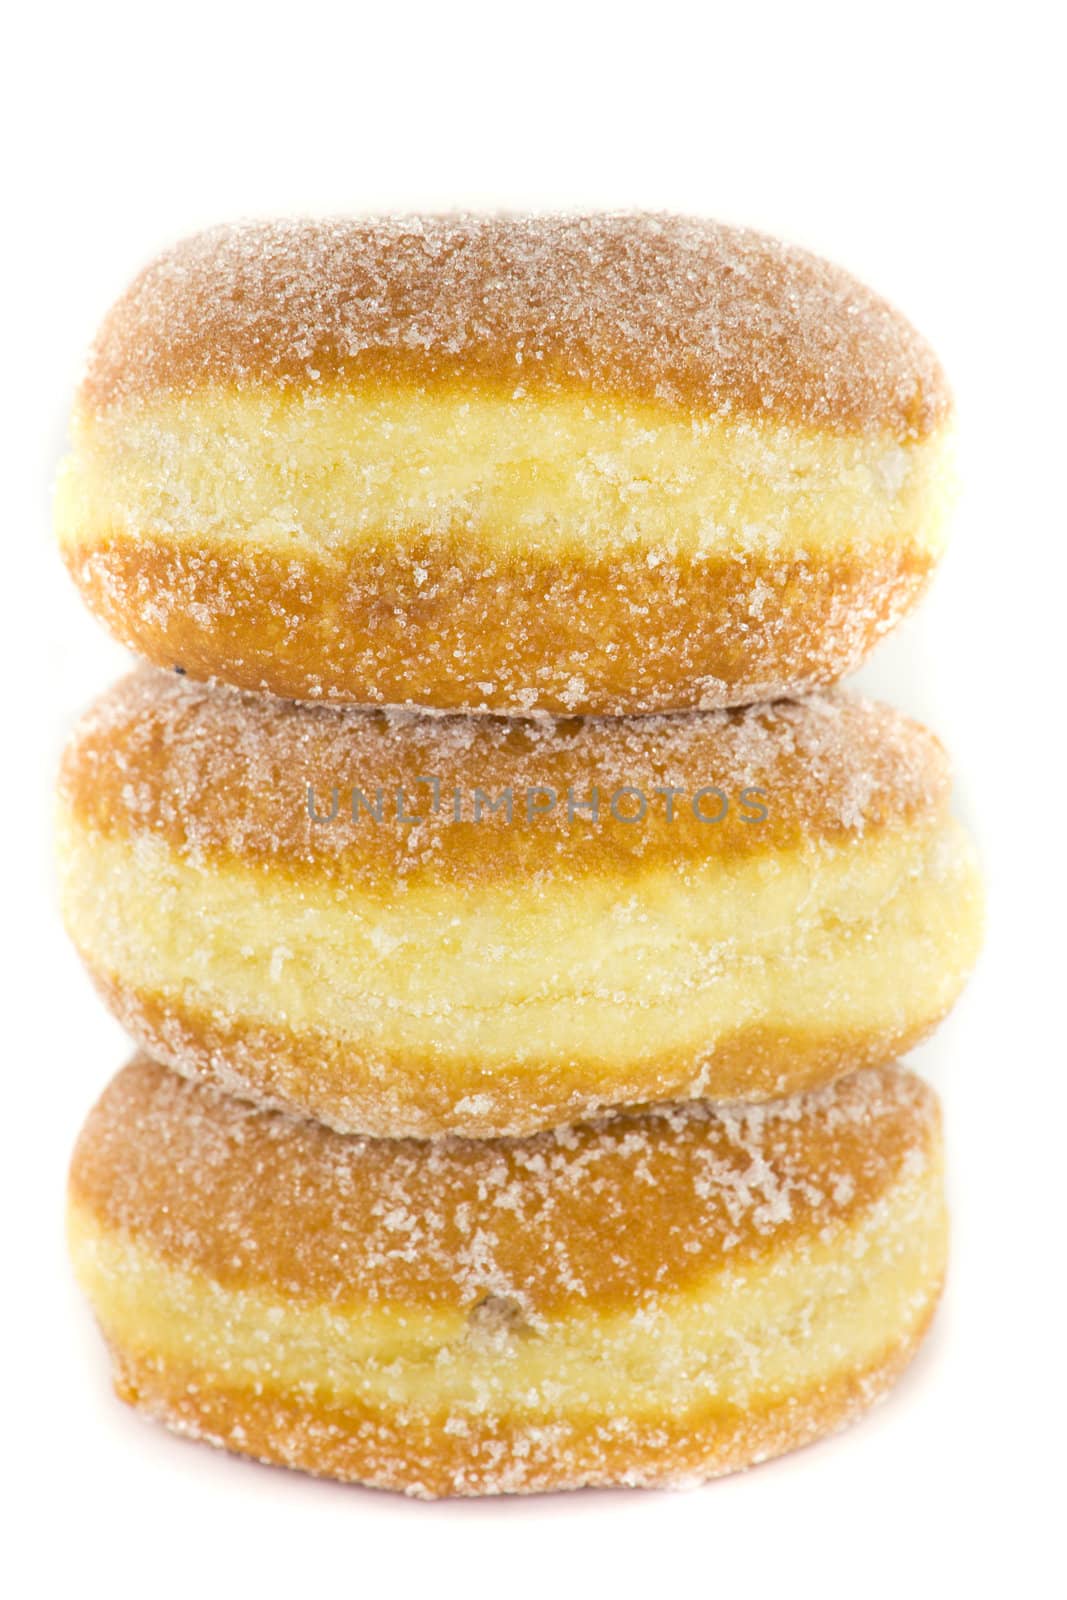 A picture of three jelly donuts stacked ontop of eachother